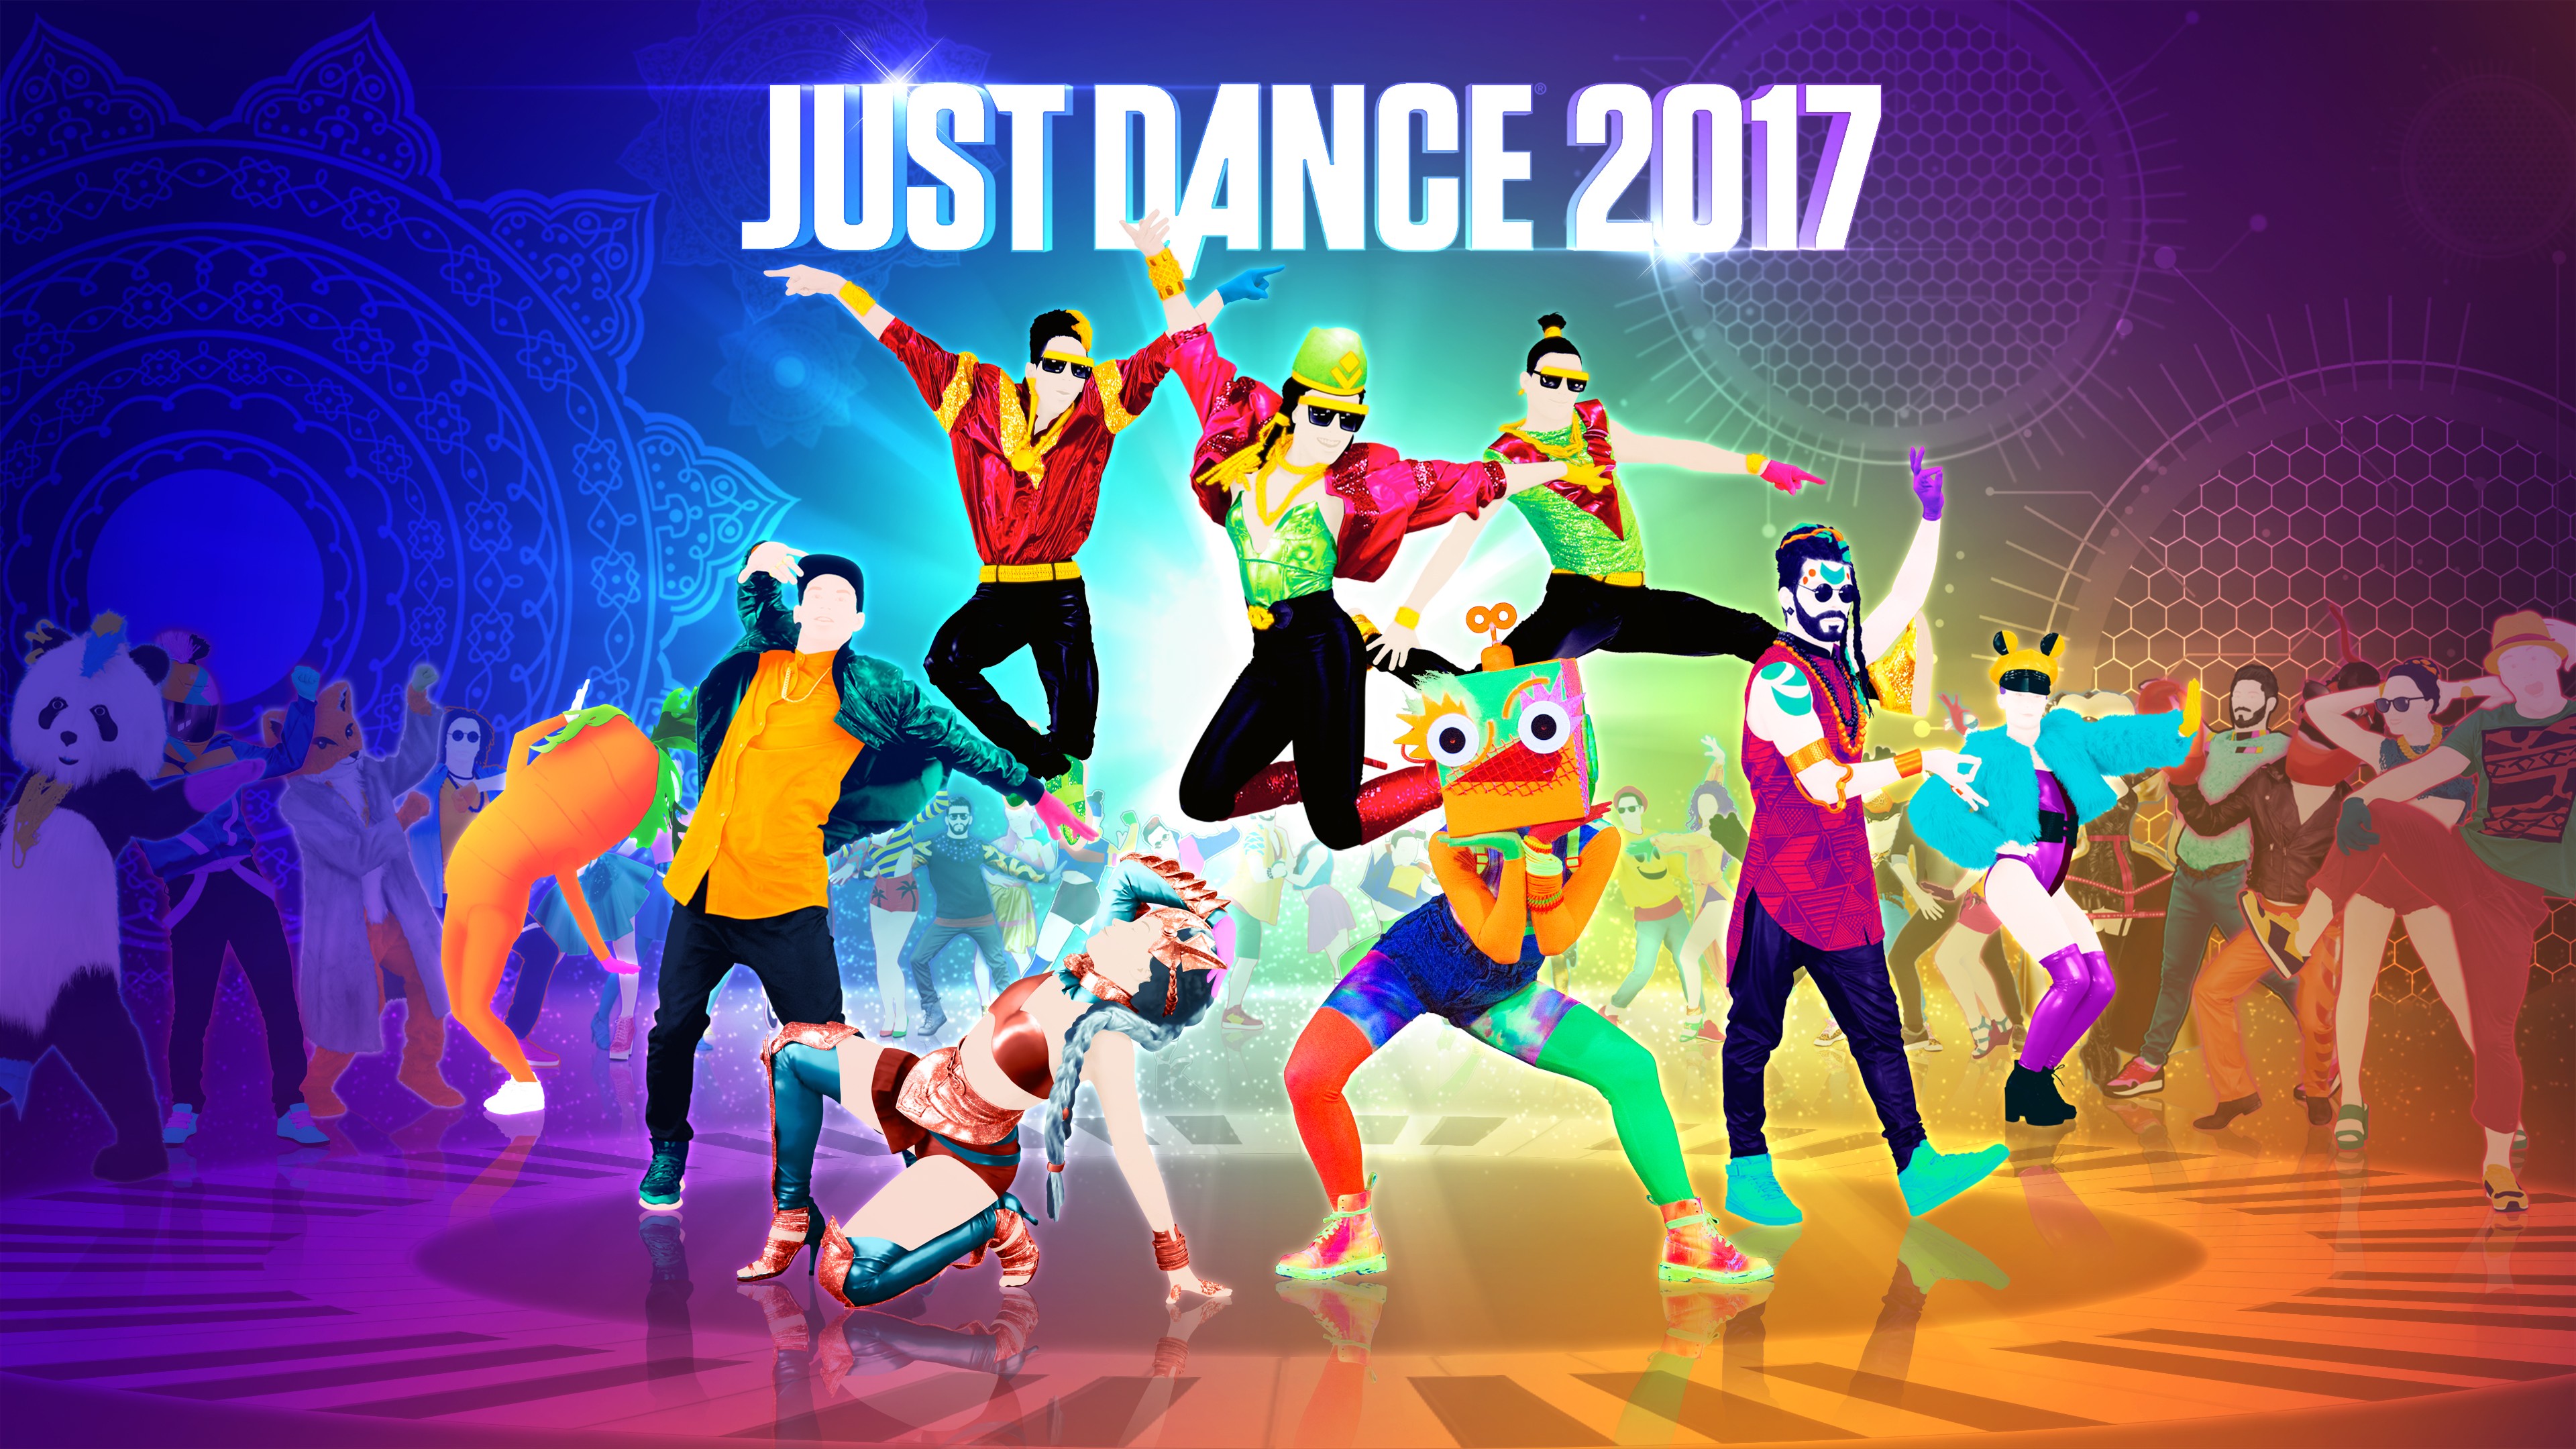 This is just a game. Just Dance (игра). Игра танцы just Dance. Джаст дэнс 2017. Джаз дэнс 2018.